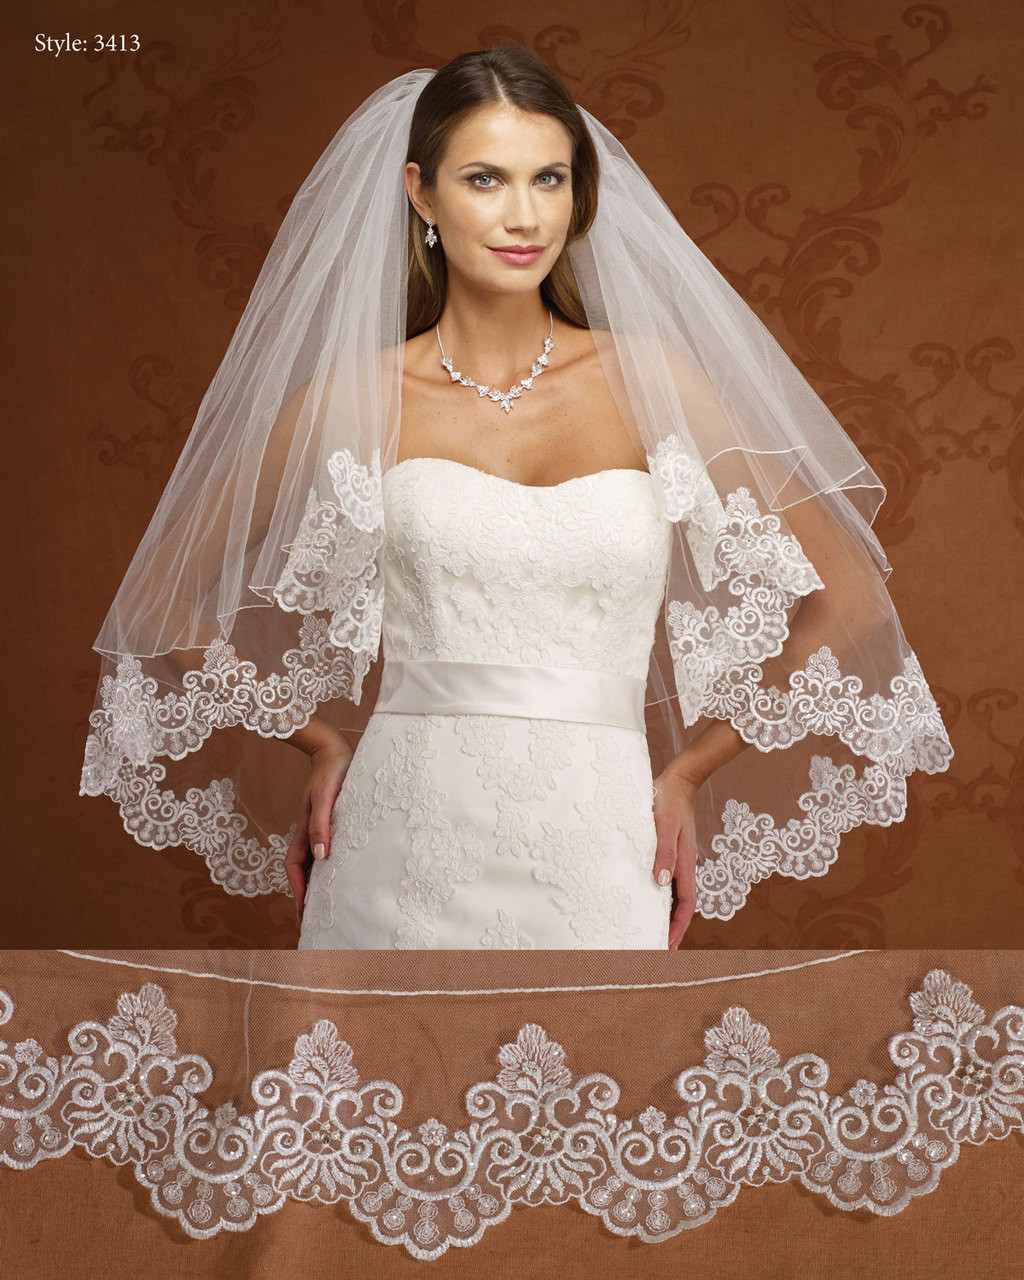 Marionat Bridal Veils 3413 Two Tier Lace Edge With Rolled Edge Blusher